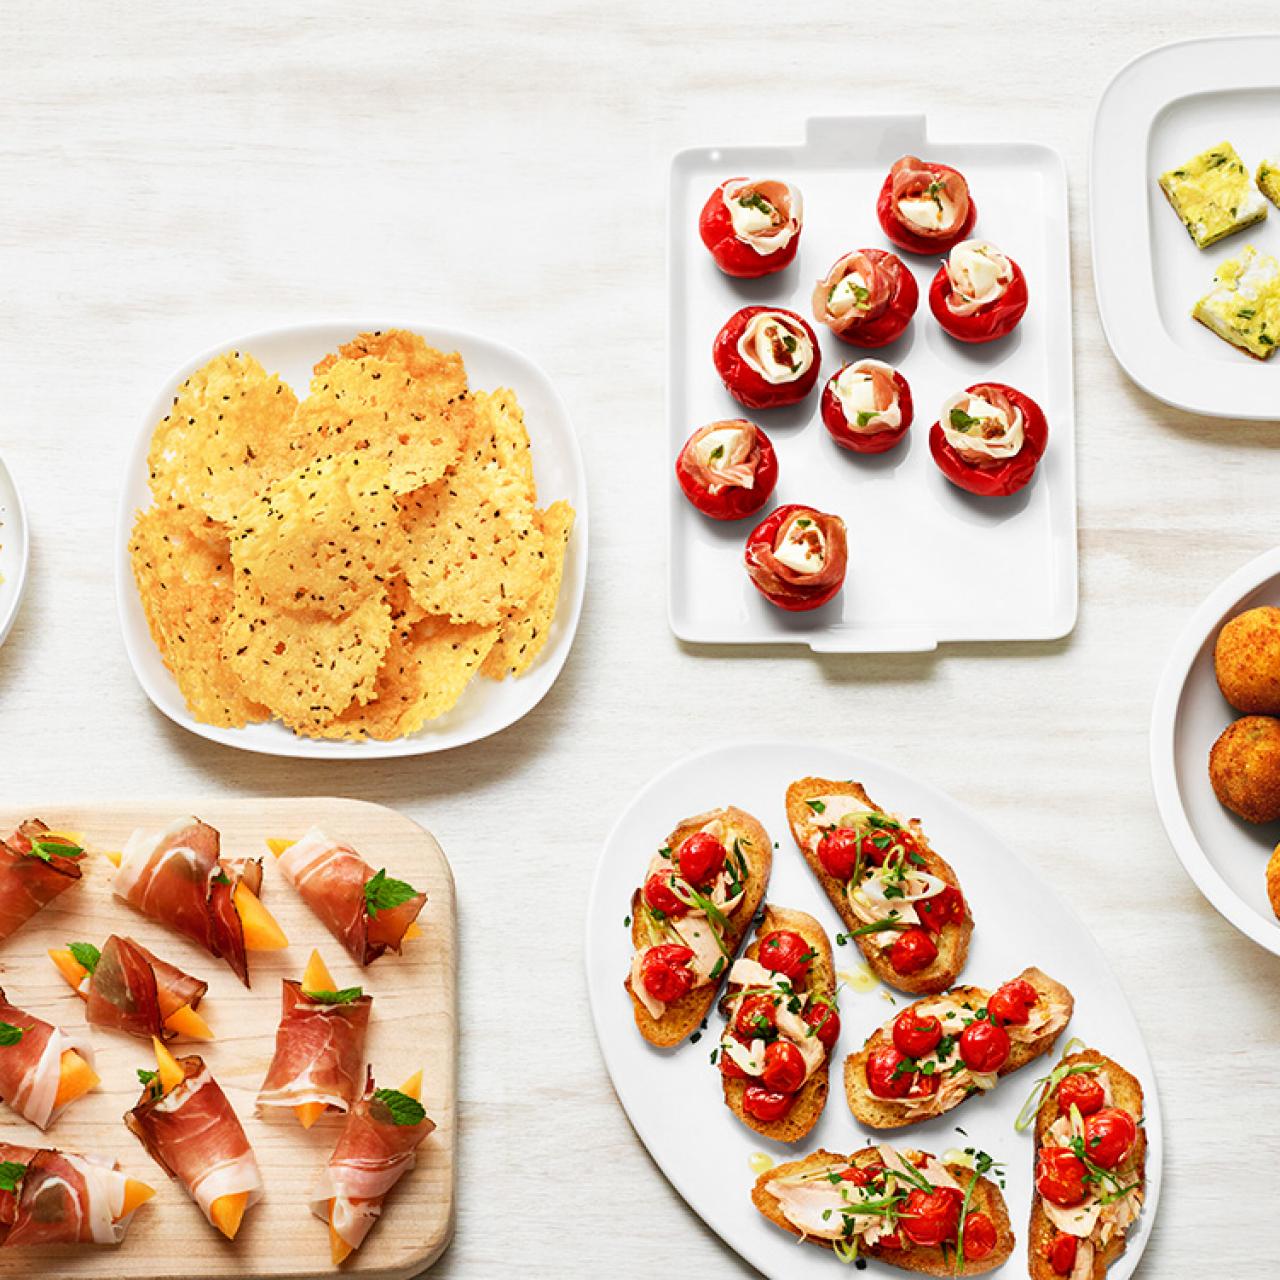 50 Antipasti | Recipes, Meal Network Easy Food and Ideas Dinners 